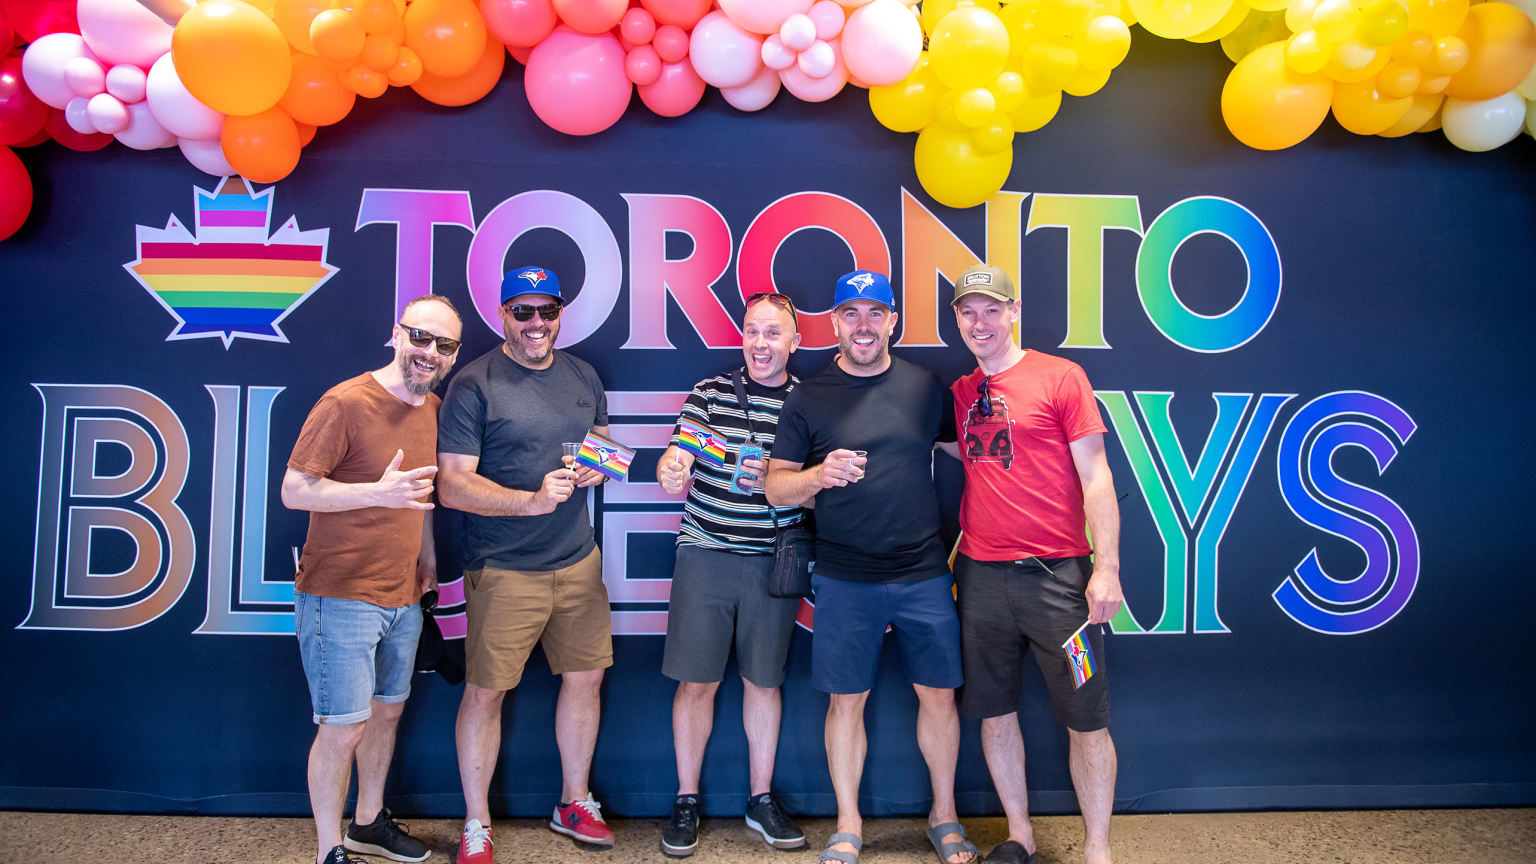 Blue Jays Pride Weekend - June 9 and 10, 2023 – theBUZZ